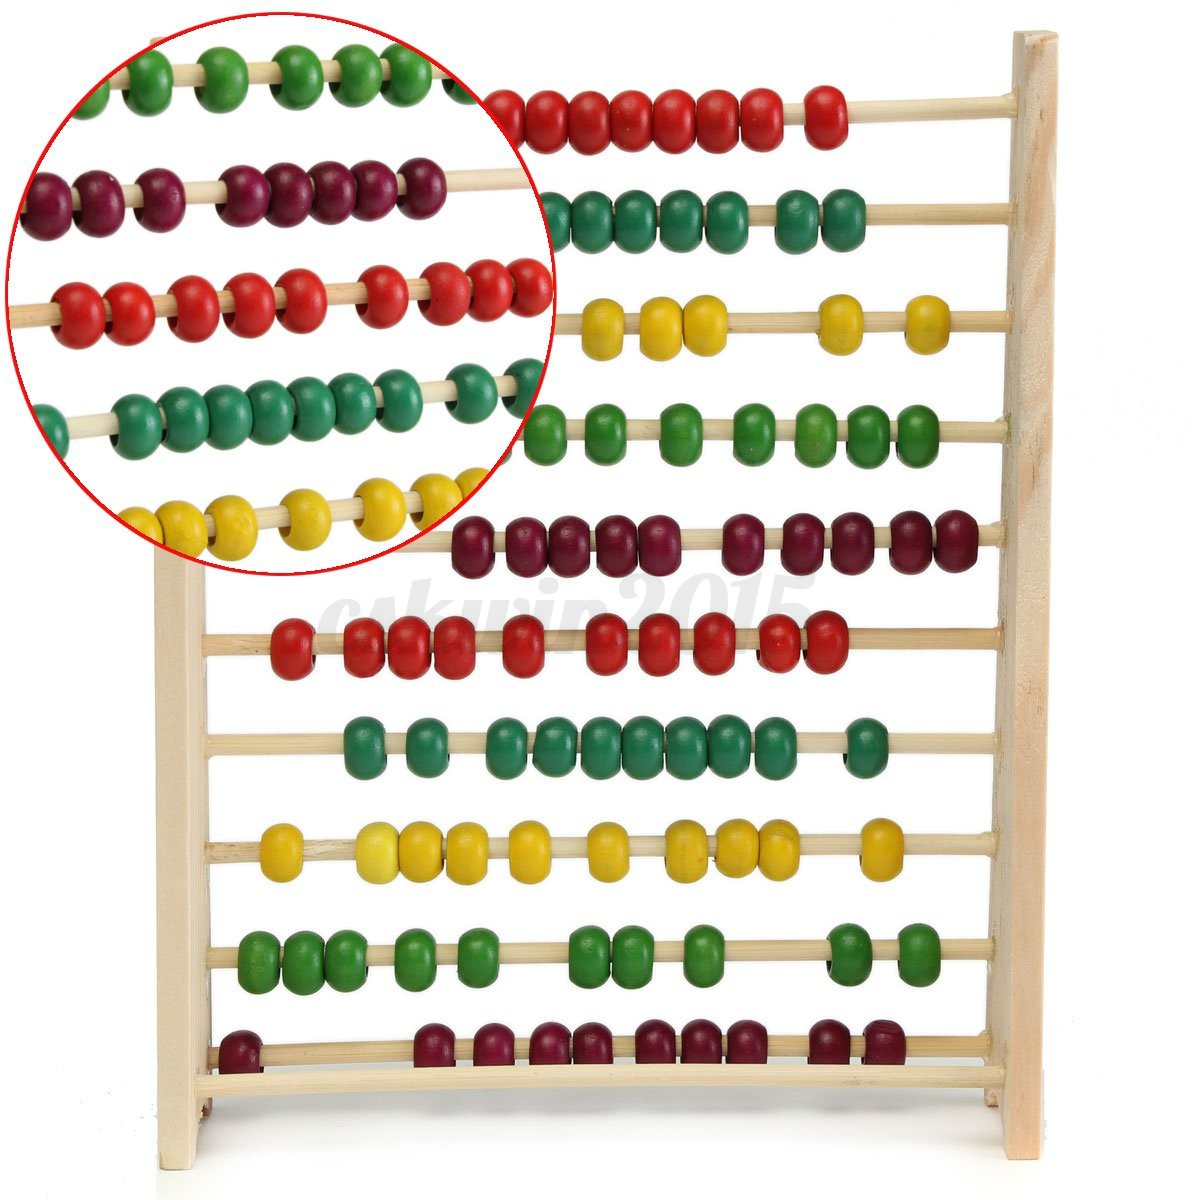 20 x 25 x 5 cm wooden abacus